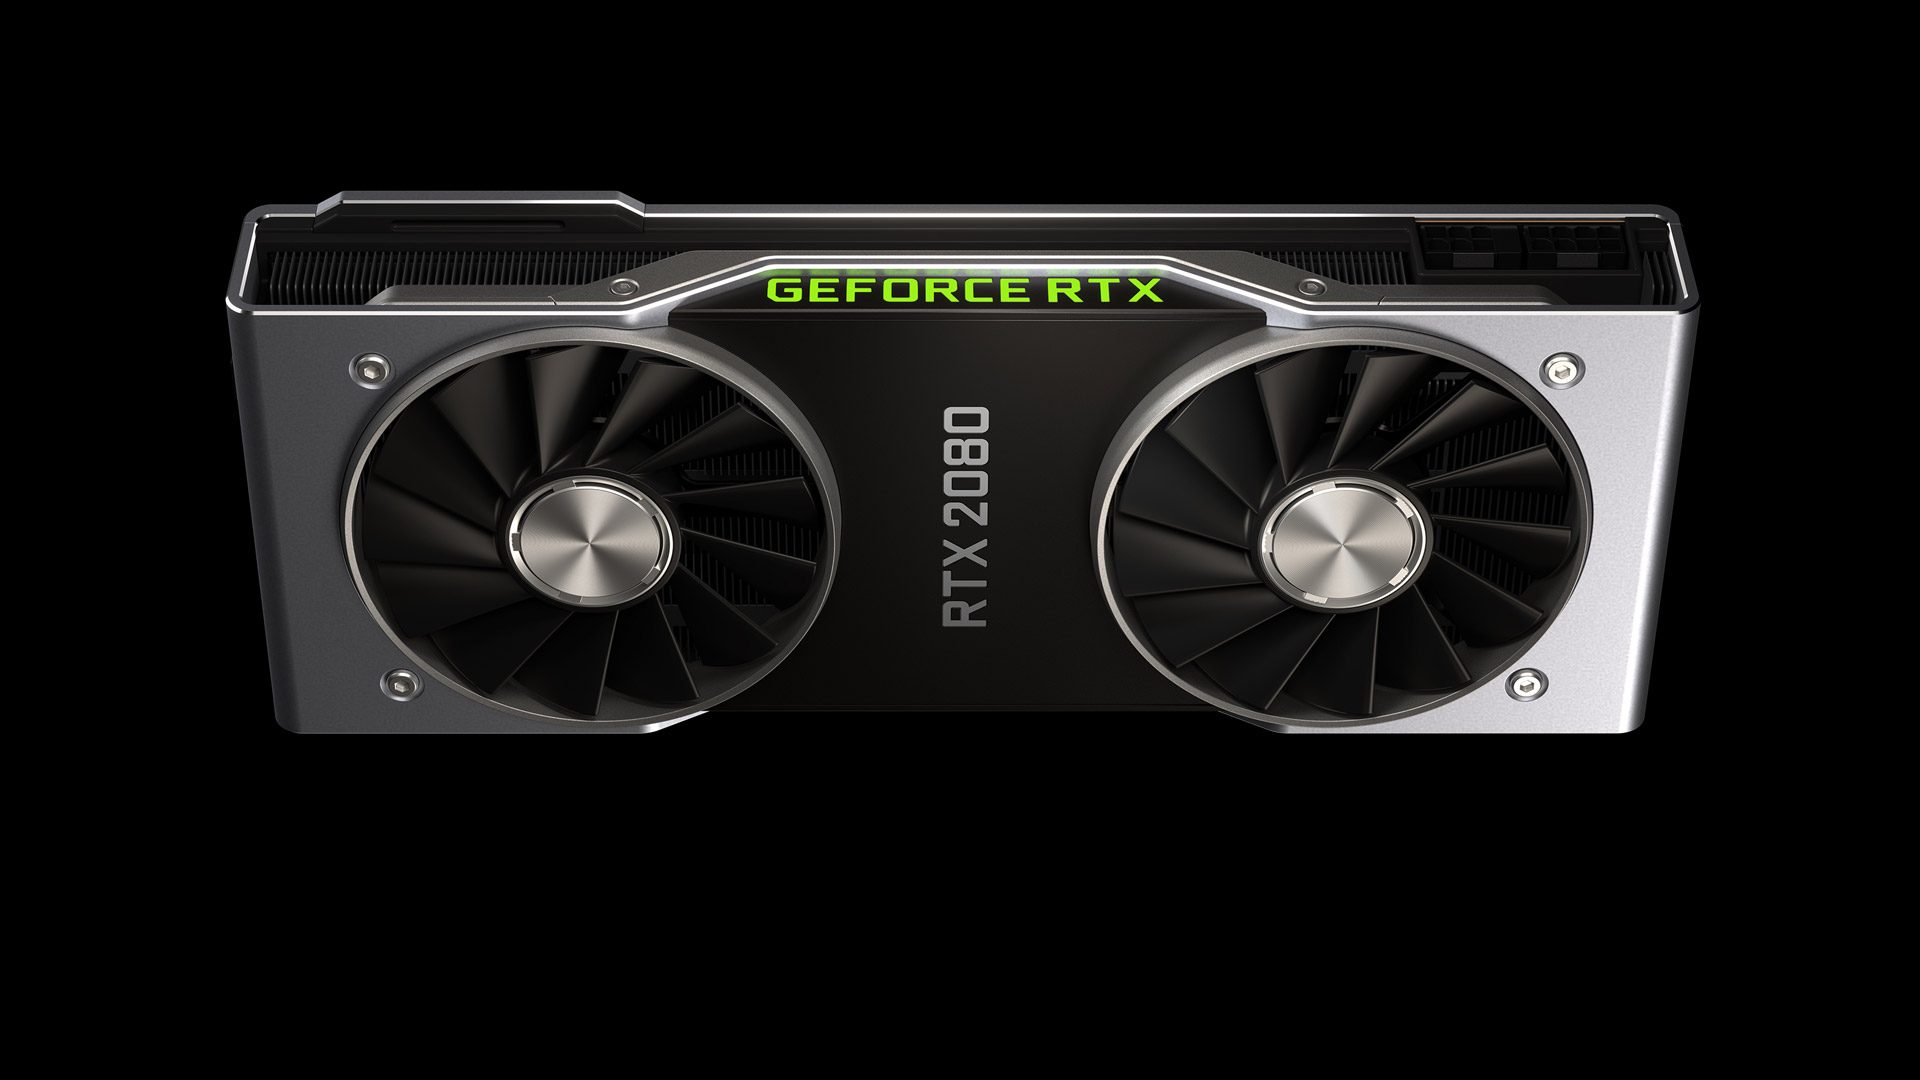 NVIDIA GeForce RTX 2080 Ti, 2080, and 2070, Starting at $500 – Road to VR